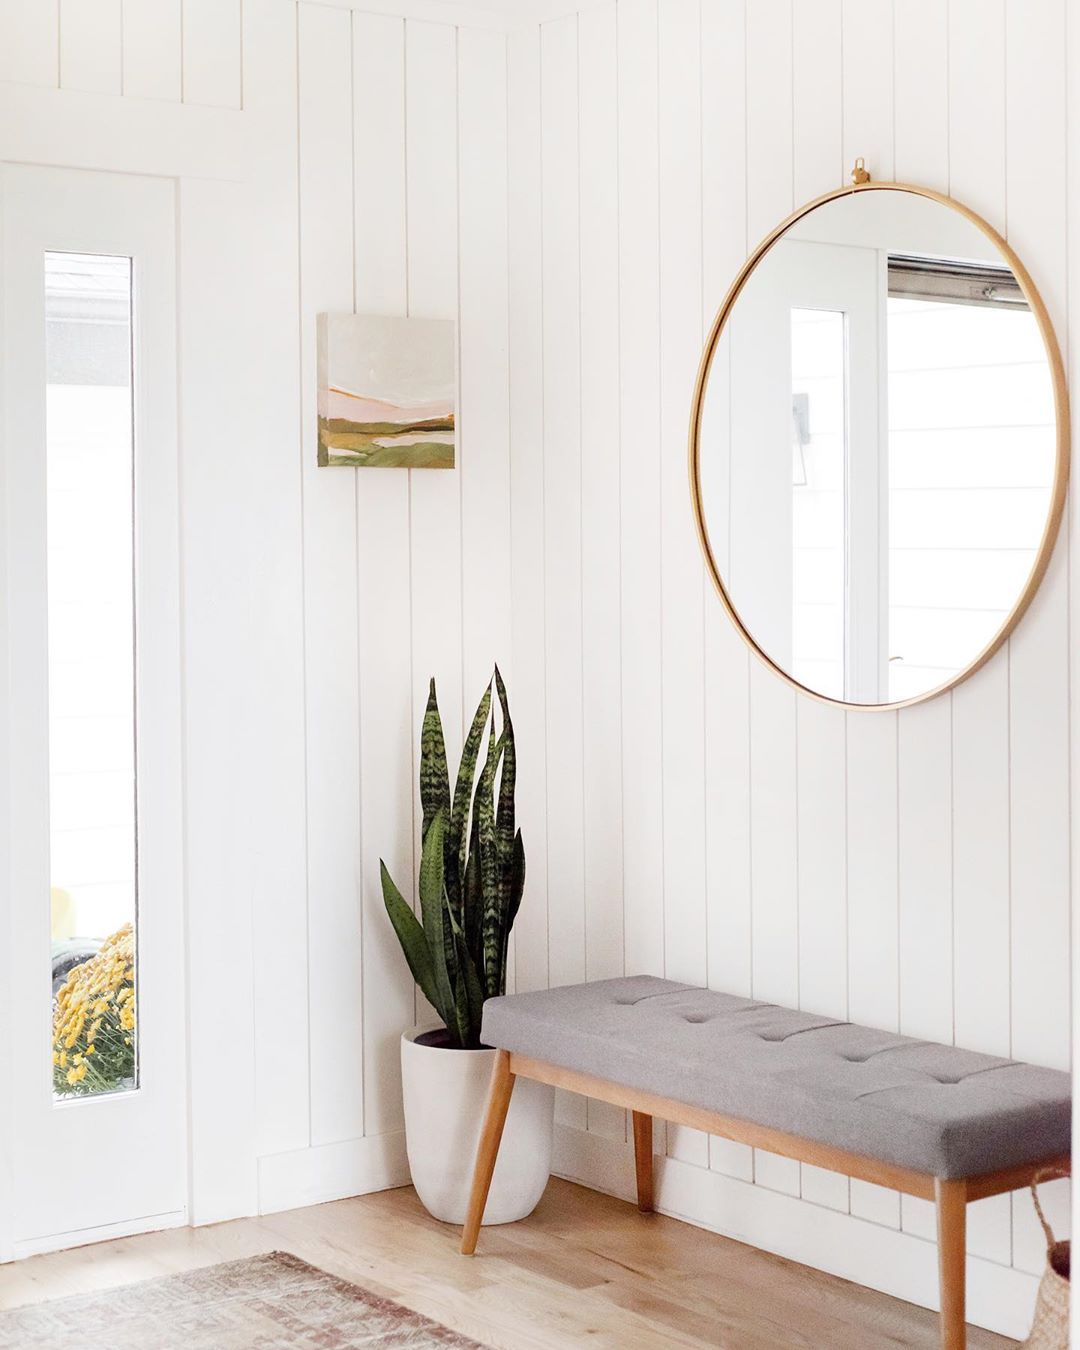 Entryway with shiplap walls and minimalist decor. Photo by Instagram user @kellikroneberger